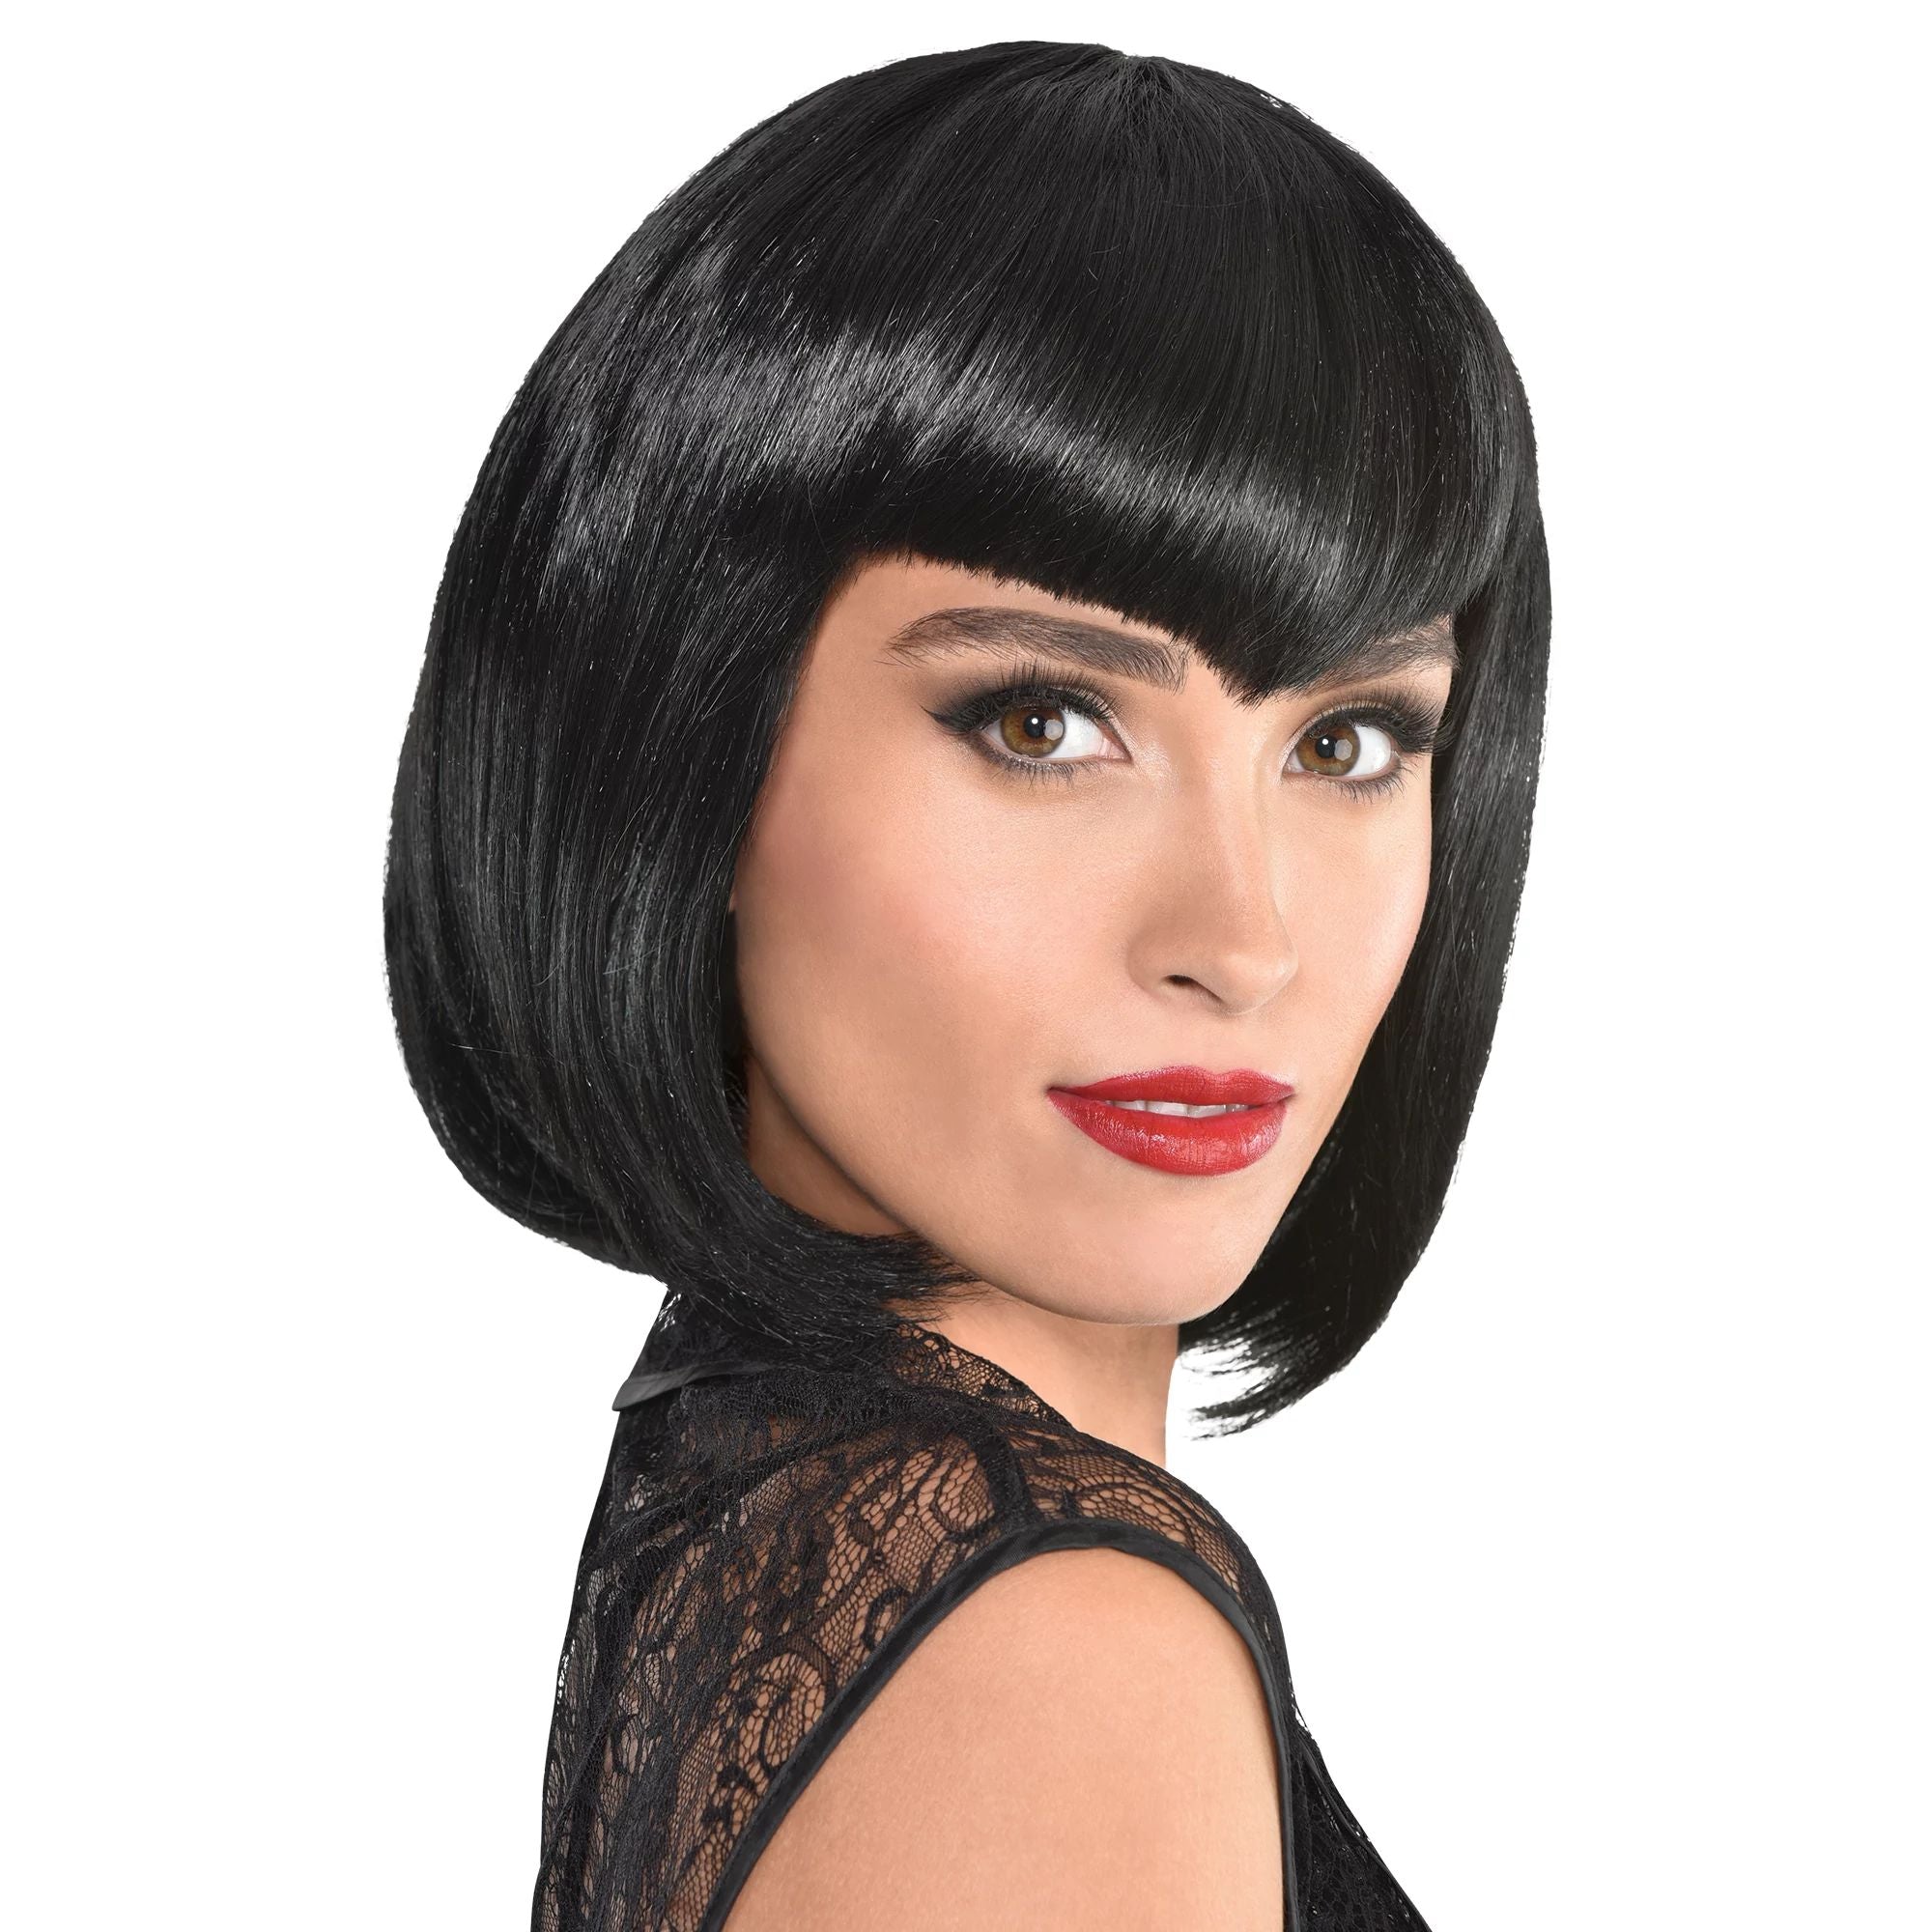 Amscan COSTUMES: WIGS Sultry Black Wig